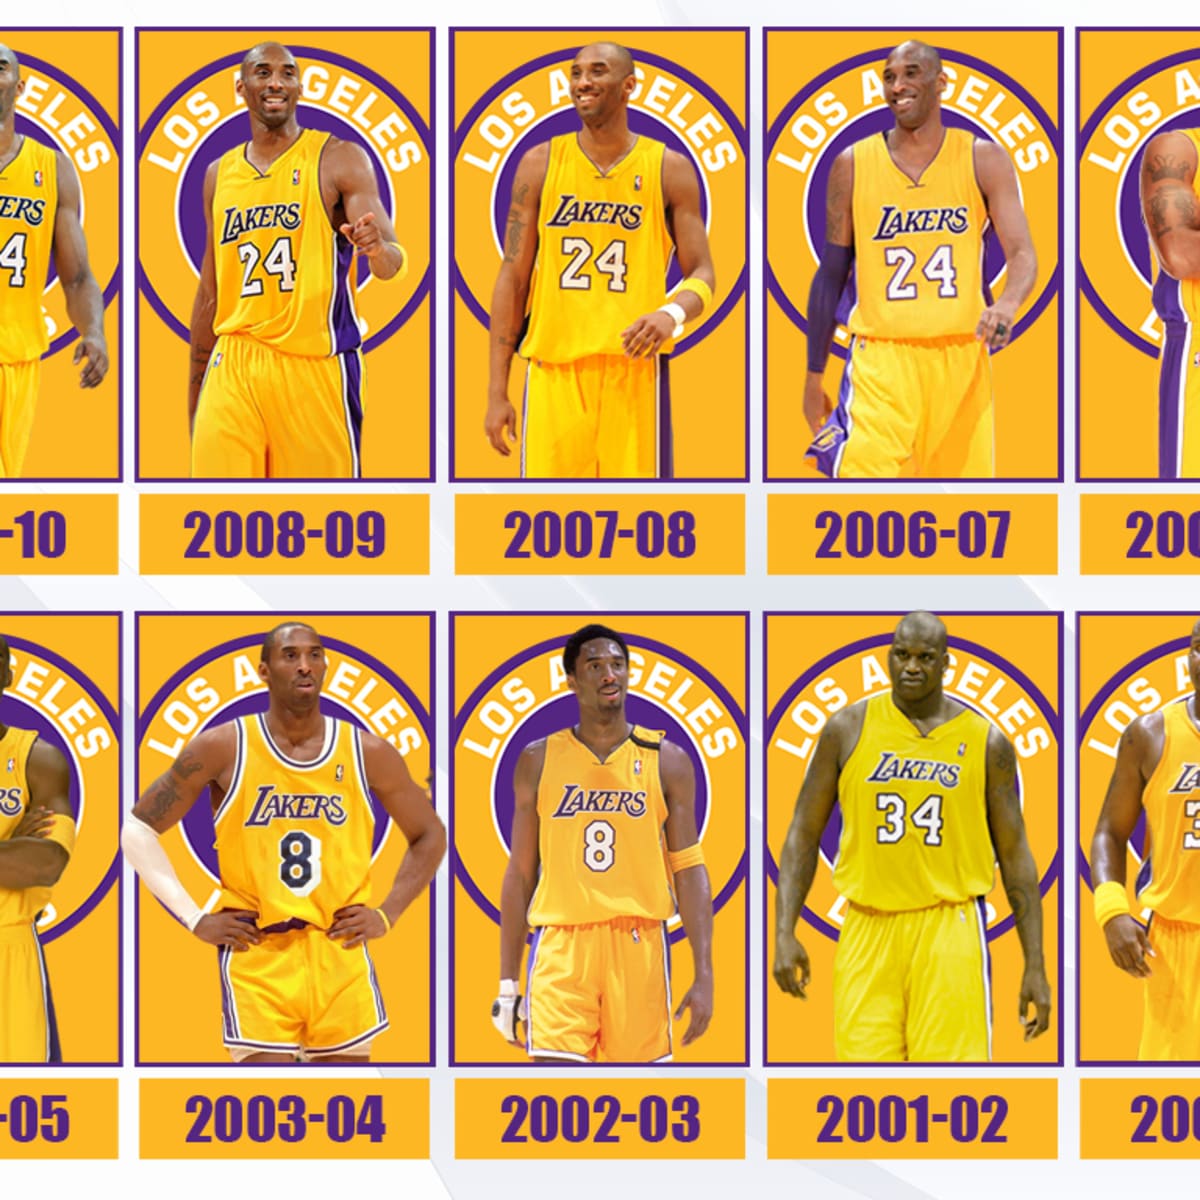 07-08 was the Lakers 60th season! And although the Lakers were